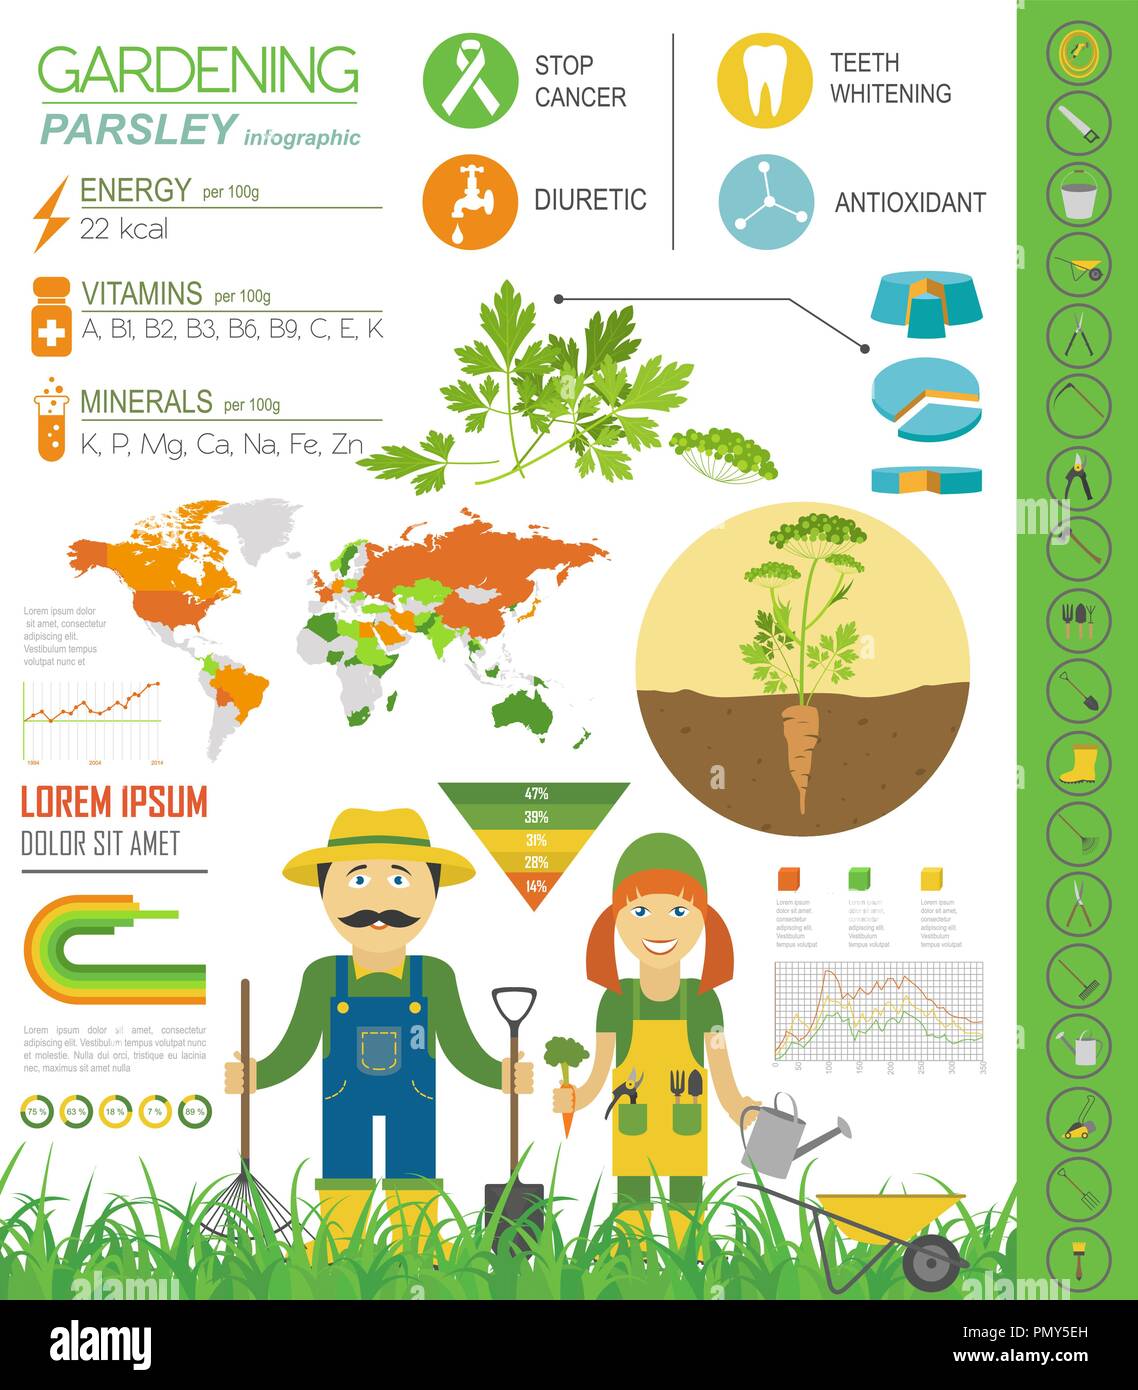 Gardening work, farming infographic. Parsley. Graphic template. Flat style design. Vector illustration Stock Vector